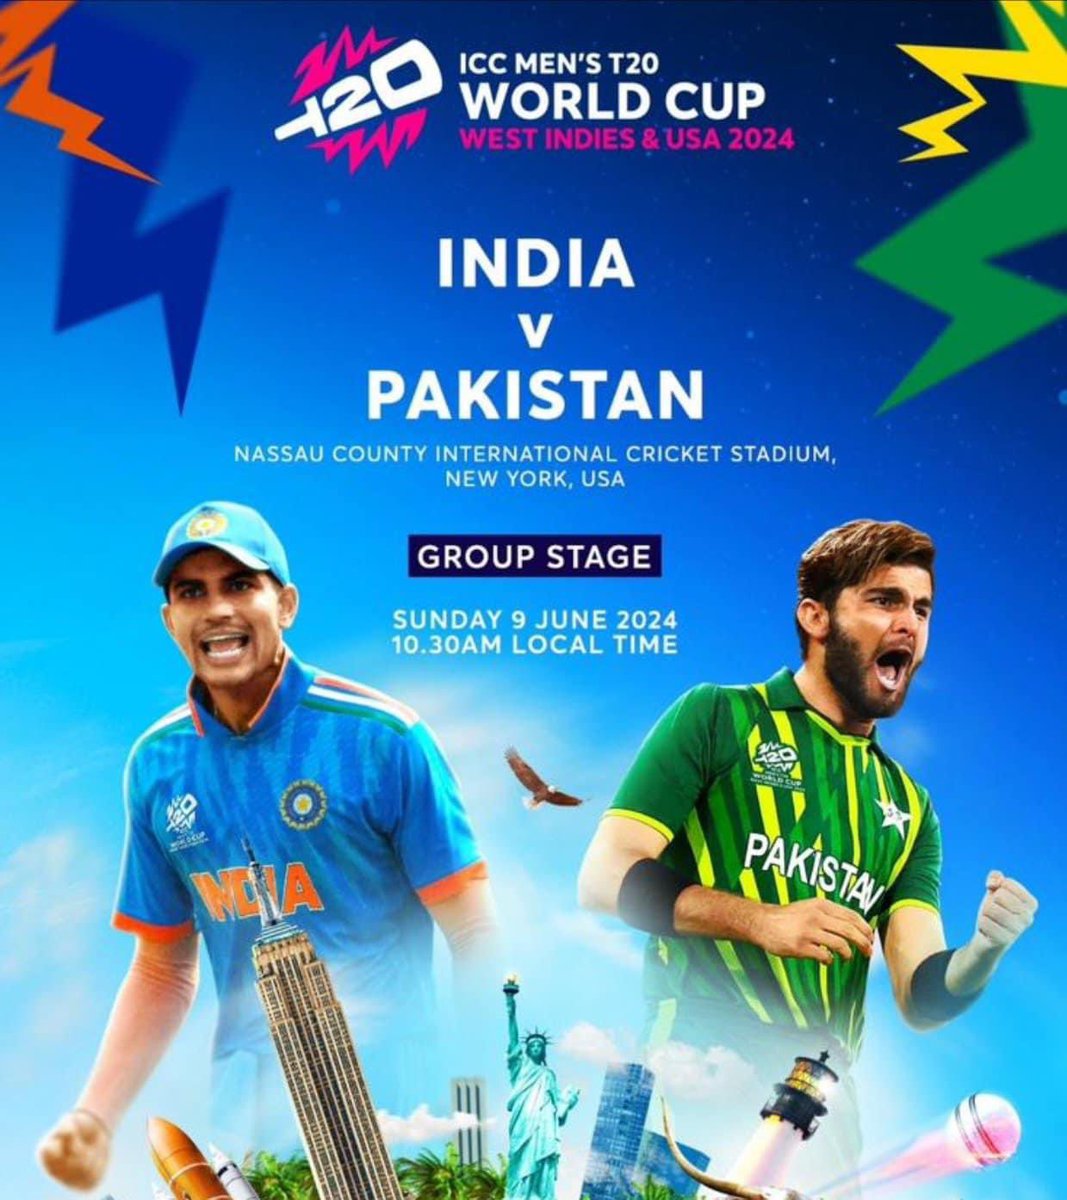 Pak vs India icc Men,s T20 World Cup Match #worldcup